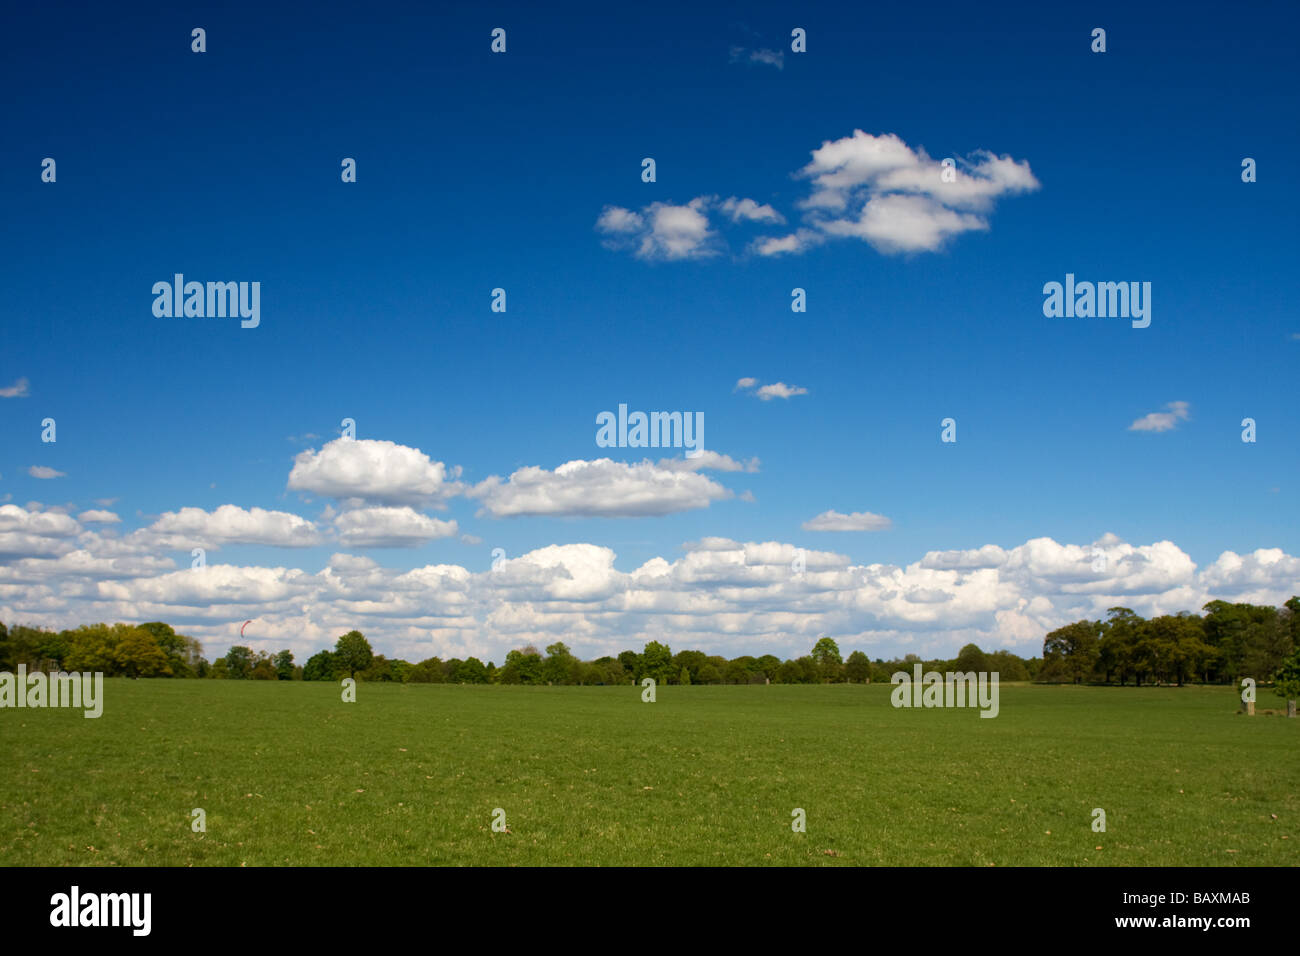 Open space with blue sky, clouds and greenery Stock Photo